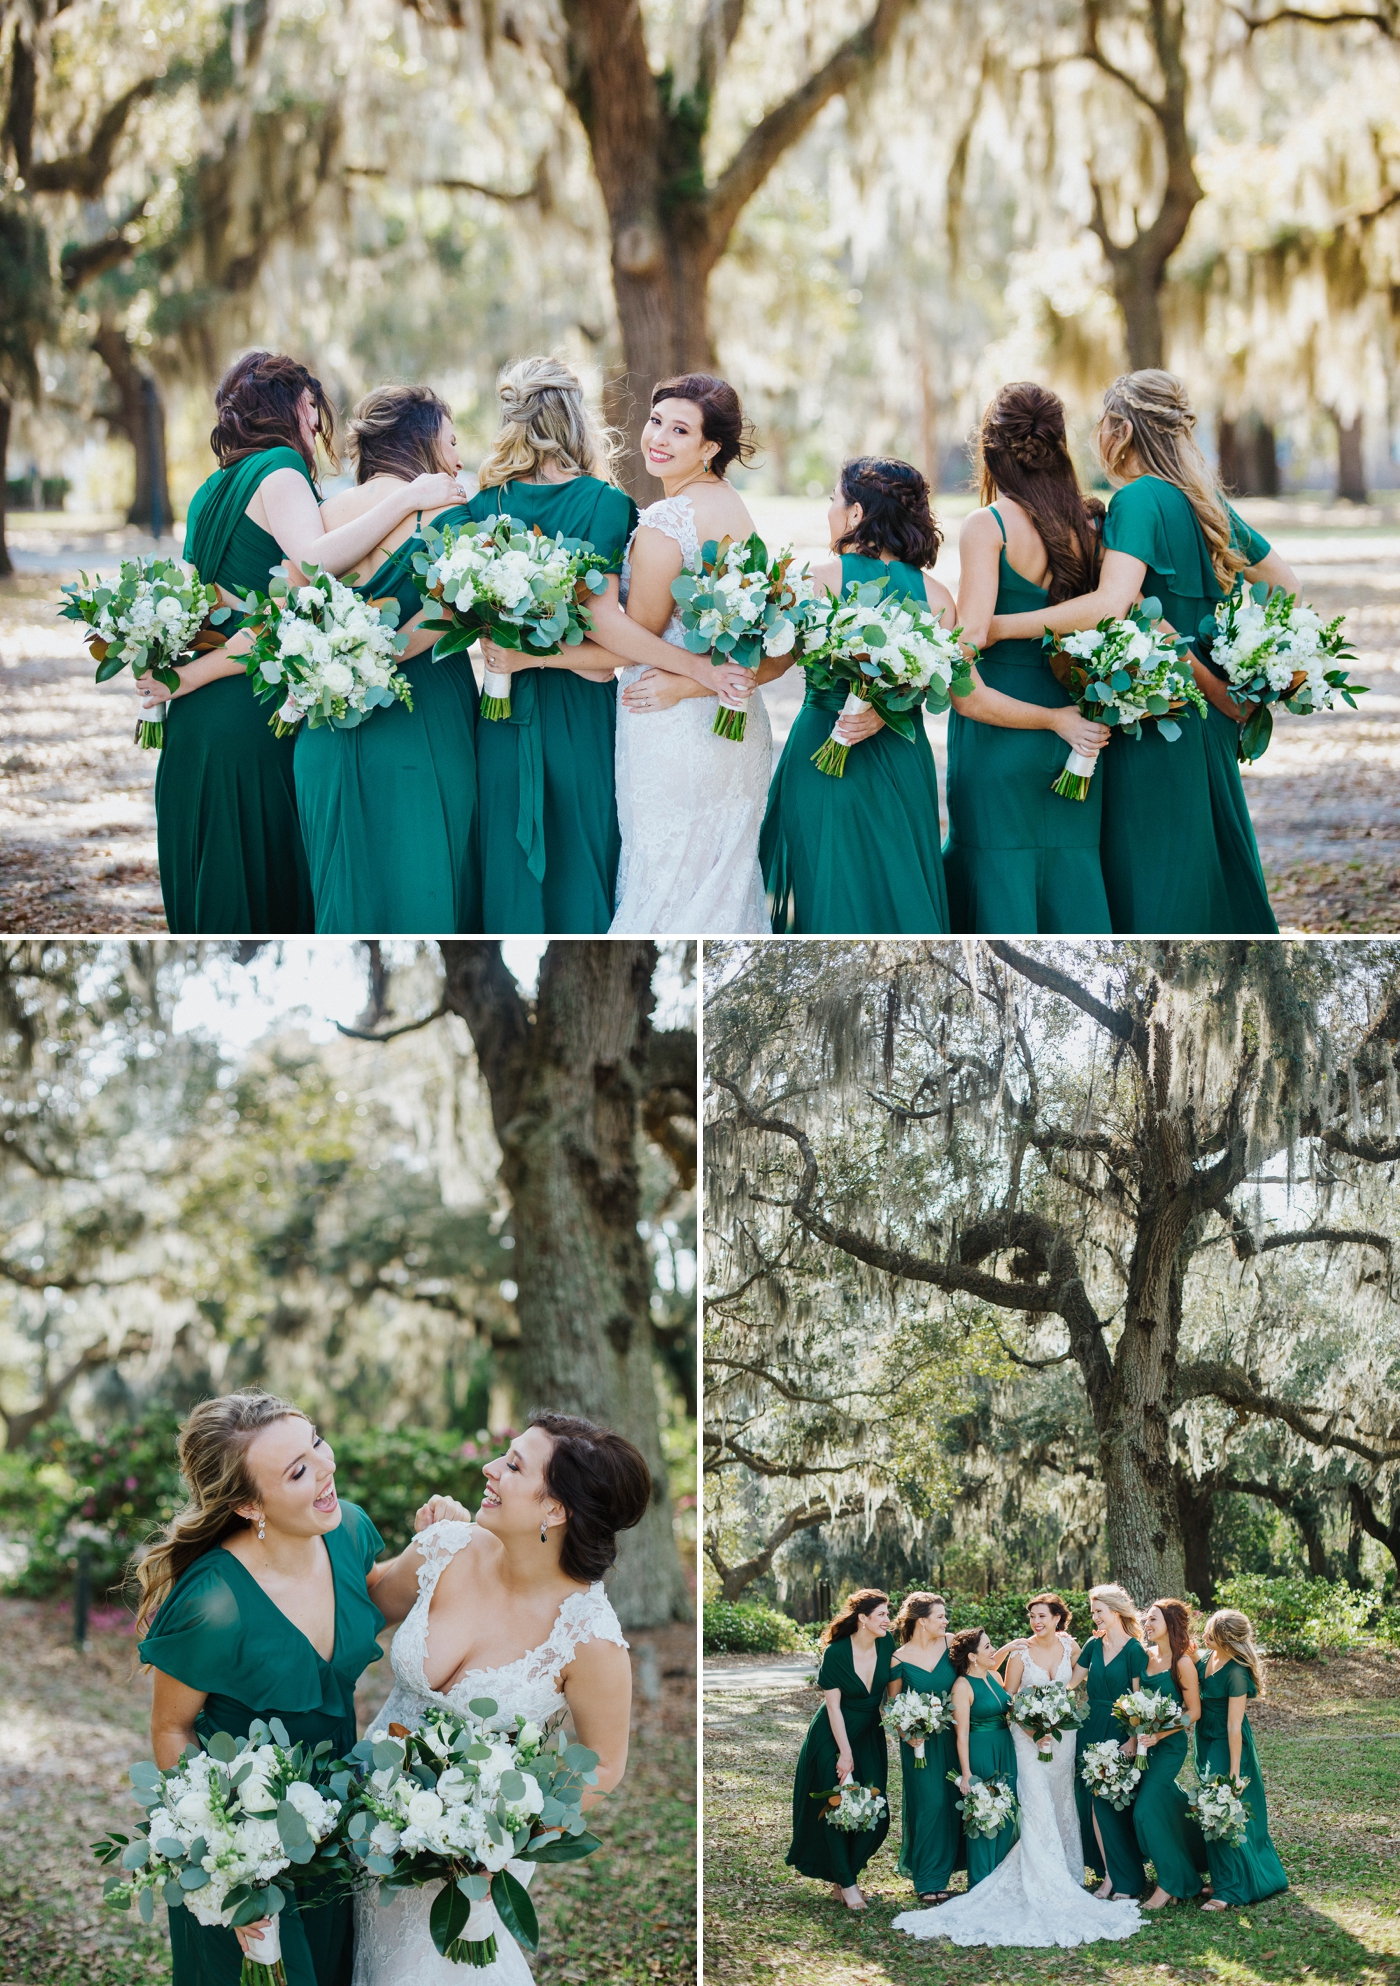 Bridesmaids in emerald green gowns